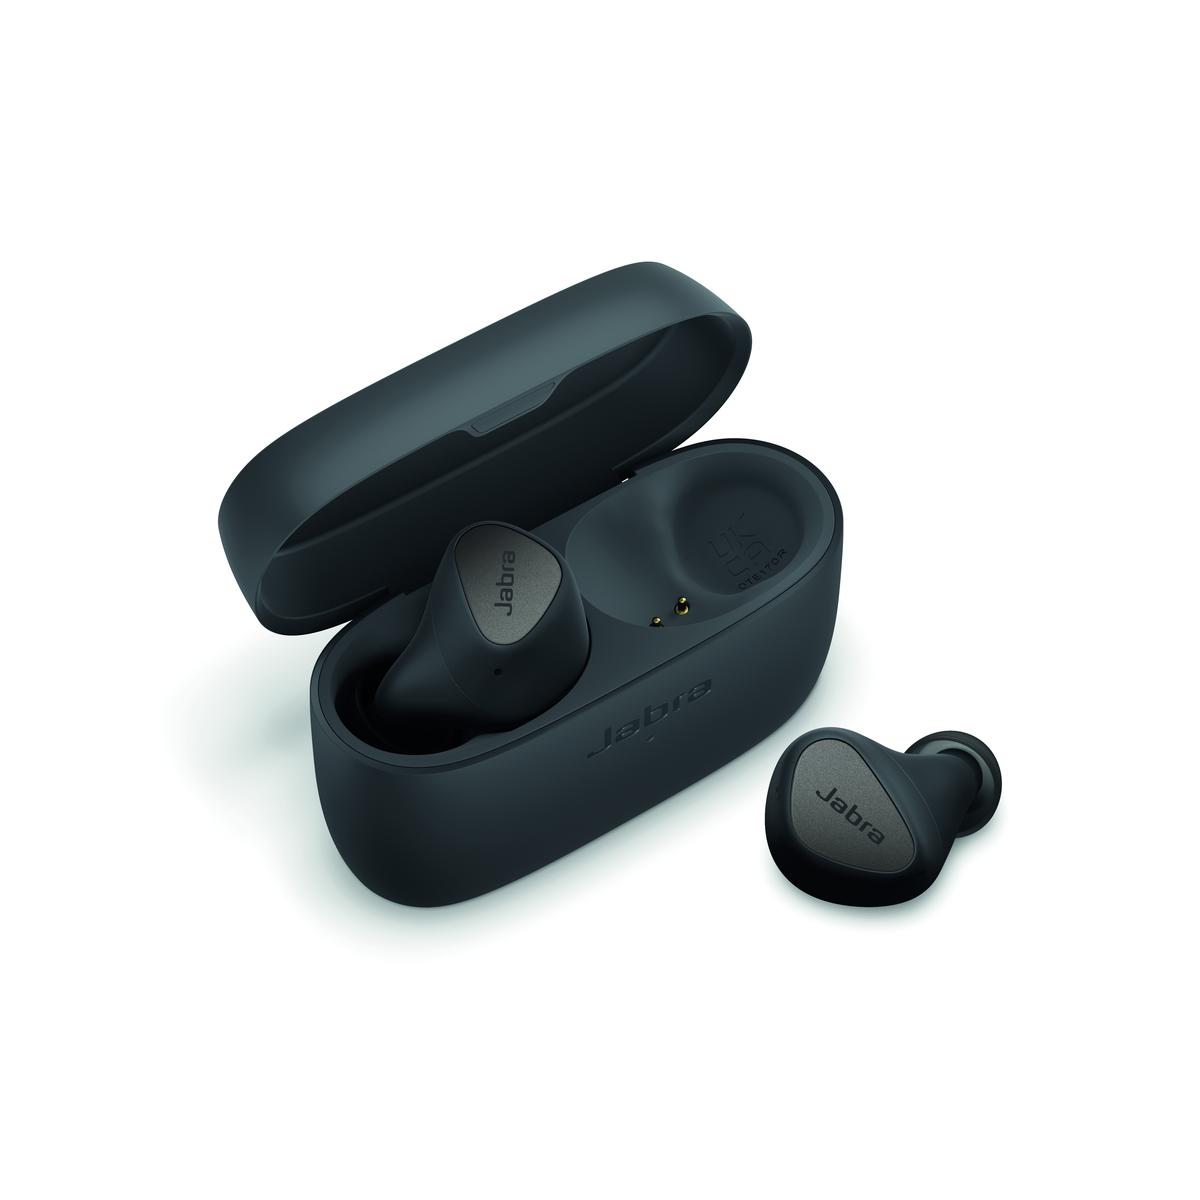 Has The Jabra Elite 4 Wireless Earbuds With ANC For 20% Off